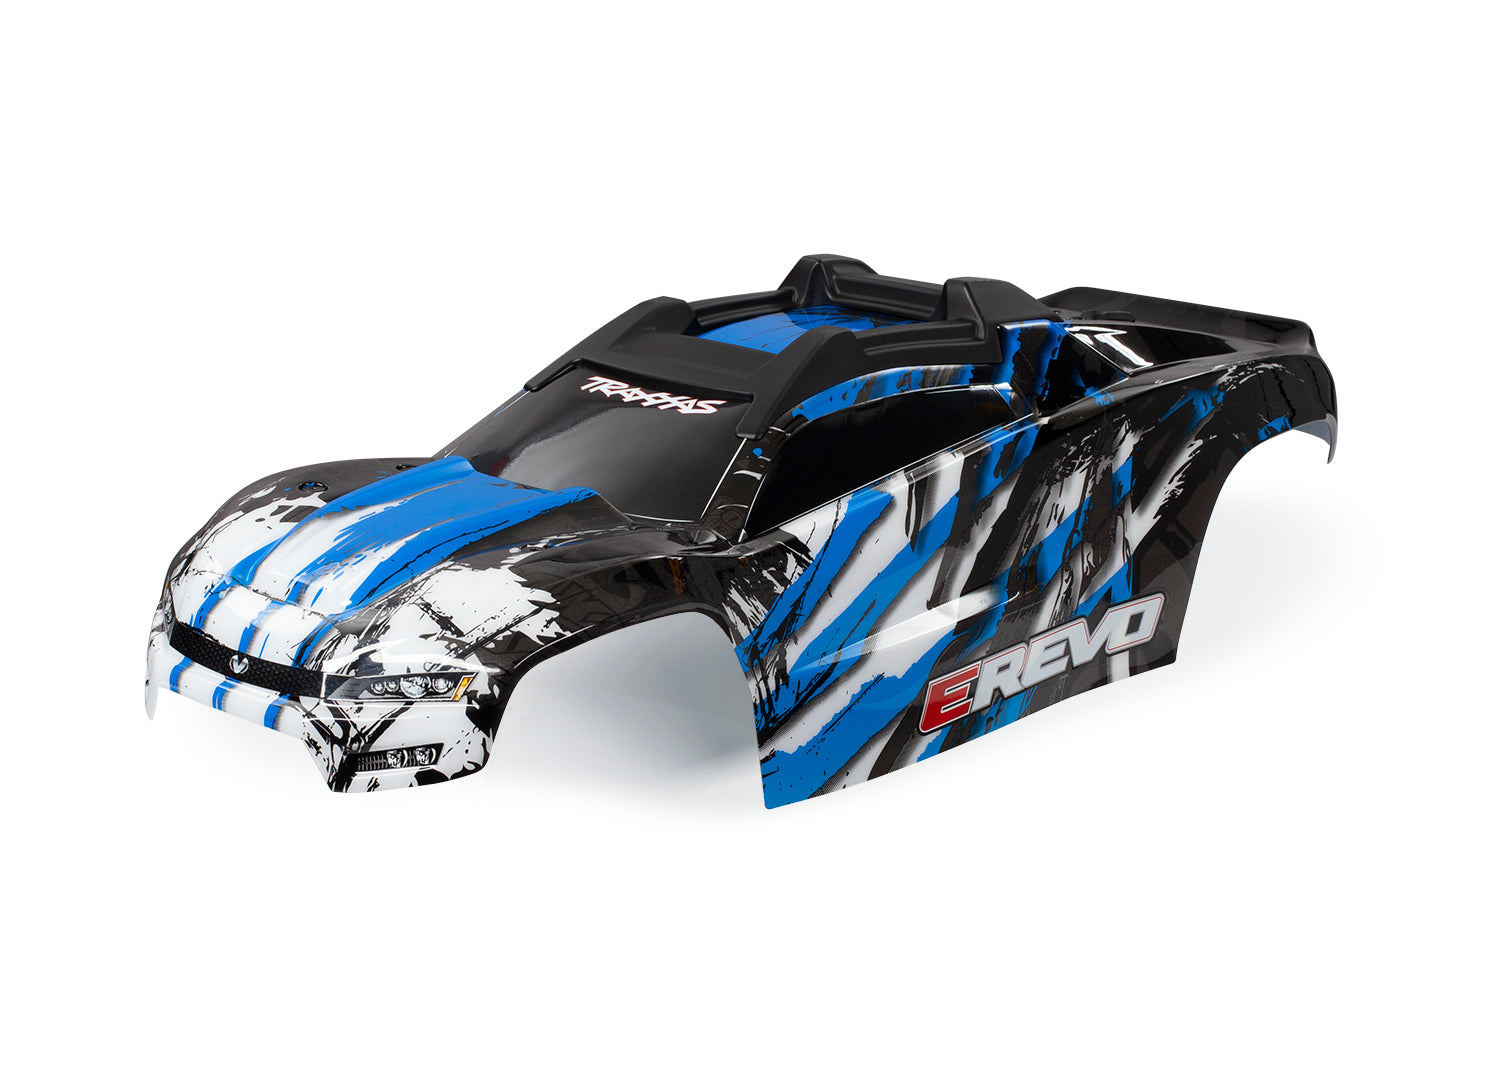 TRAXXAS 8611X Body, E-Revo, blue (painted, decals applied) (assembled with front & rear body mounts and rear body support for clipless mounting)